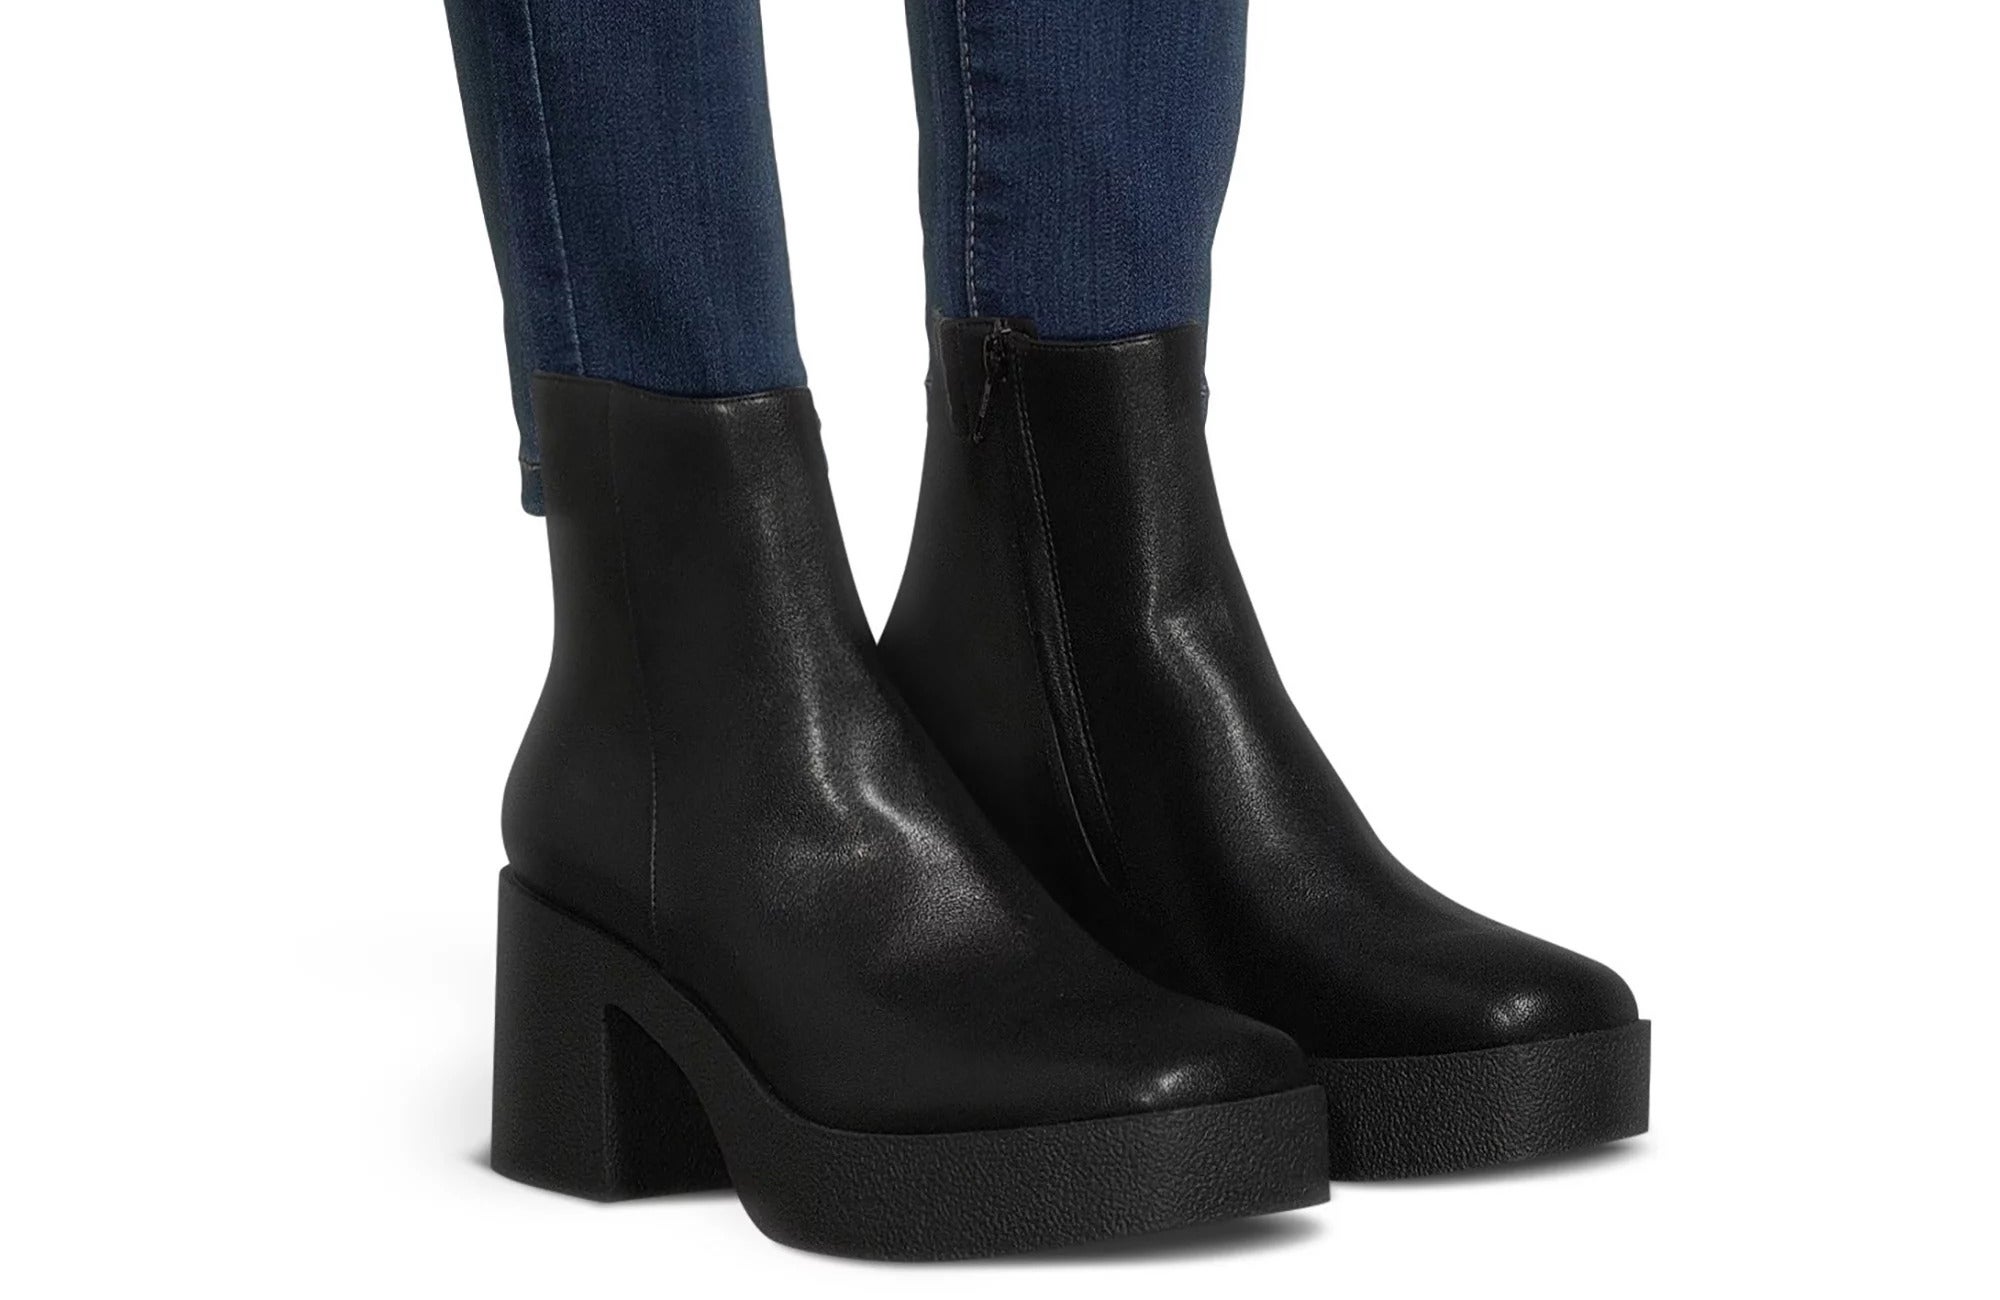 A model wearing the boots in black, which have zips on the side